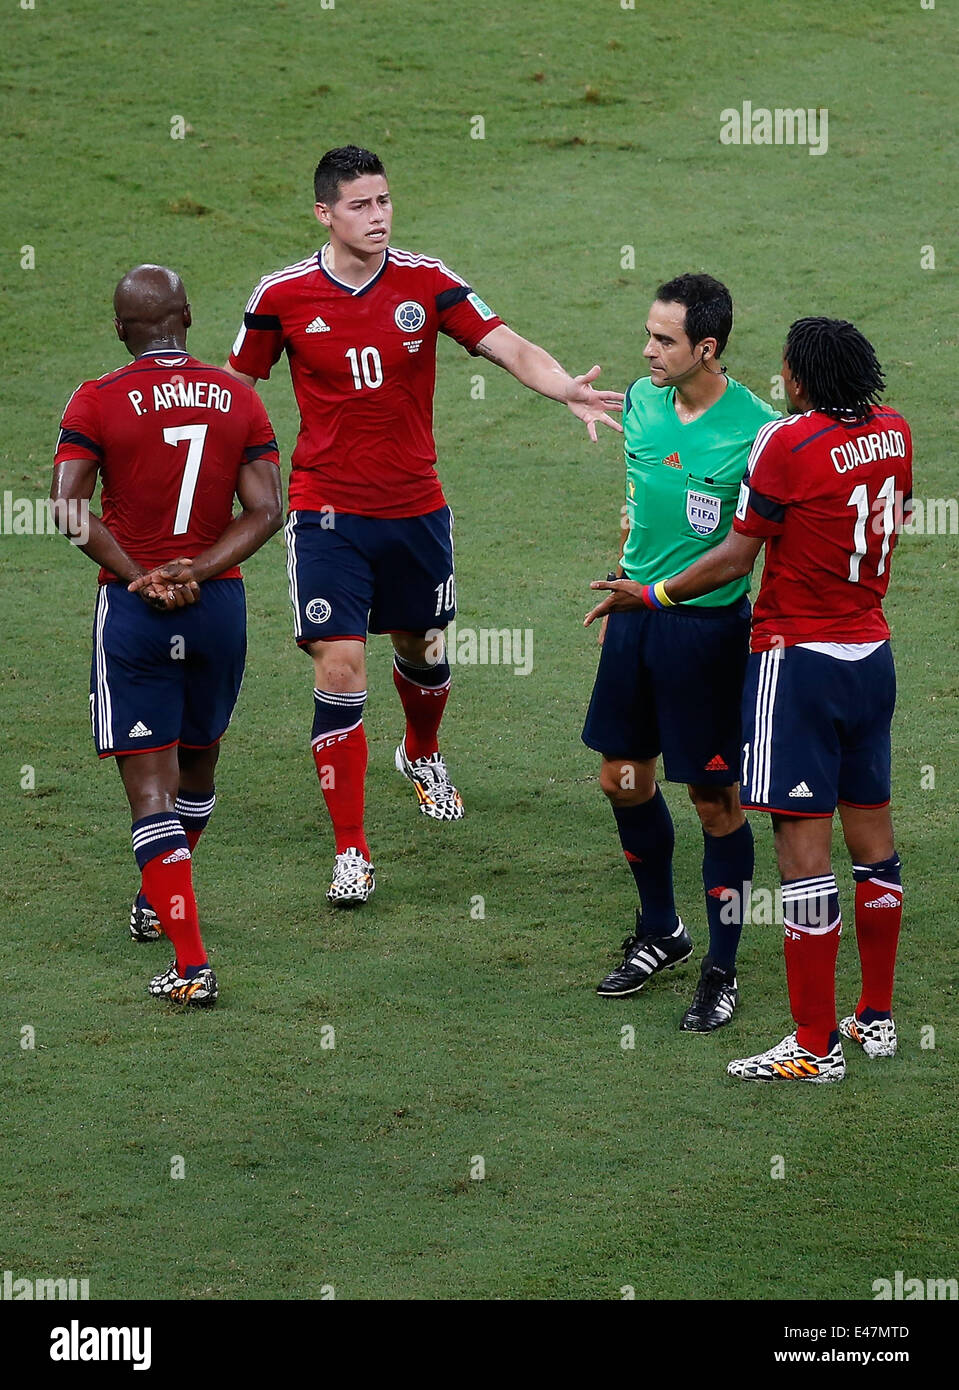 Fortaleza, Brazil. 4th July, 2014. Colombia's James Rodriguez (2nd L) and Juan Guillermo Cuadrado (1st R) argue with Spain's referee Carlos Velasco Carballo (2nd R) during a quarter-finals match between Brazil and Colombia of 2014 FIFA World Cup at the Estadio Castelao Stadium in Fortaleza, Brazil, on July 4, 2014. Credit:  Liao Yujie/Xinhua/Alamy Live News Stock Photo